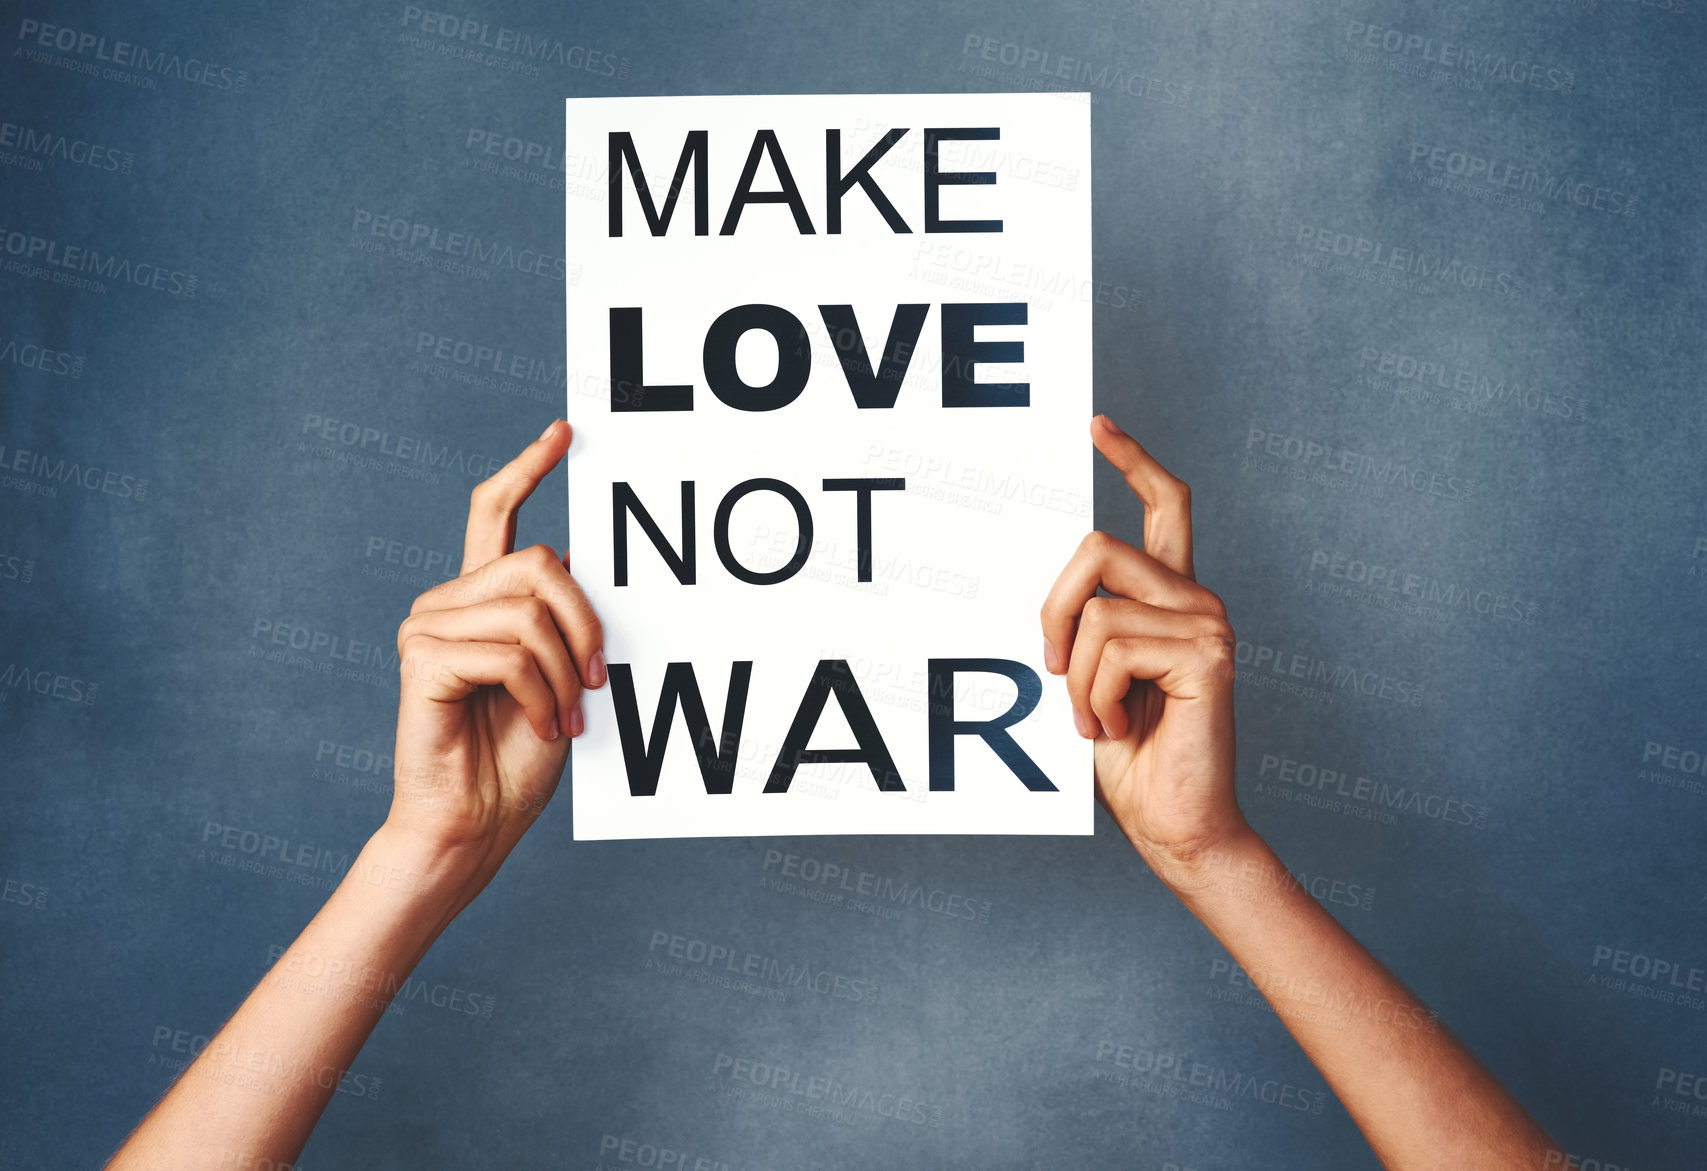 Buy stock photo Studio shot of an woman holding a sign that says “make love not war” against a blue background